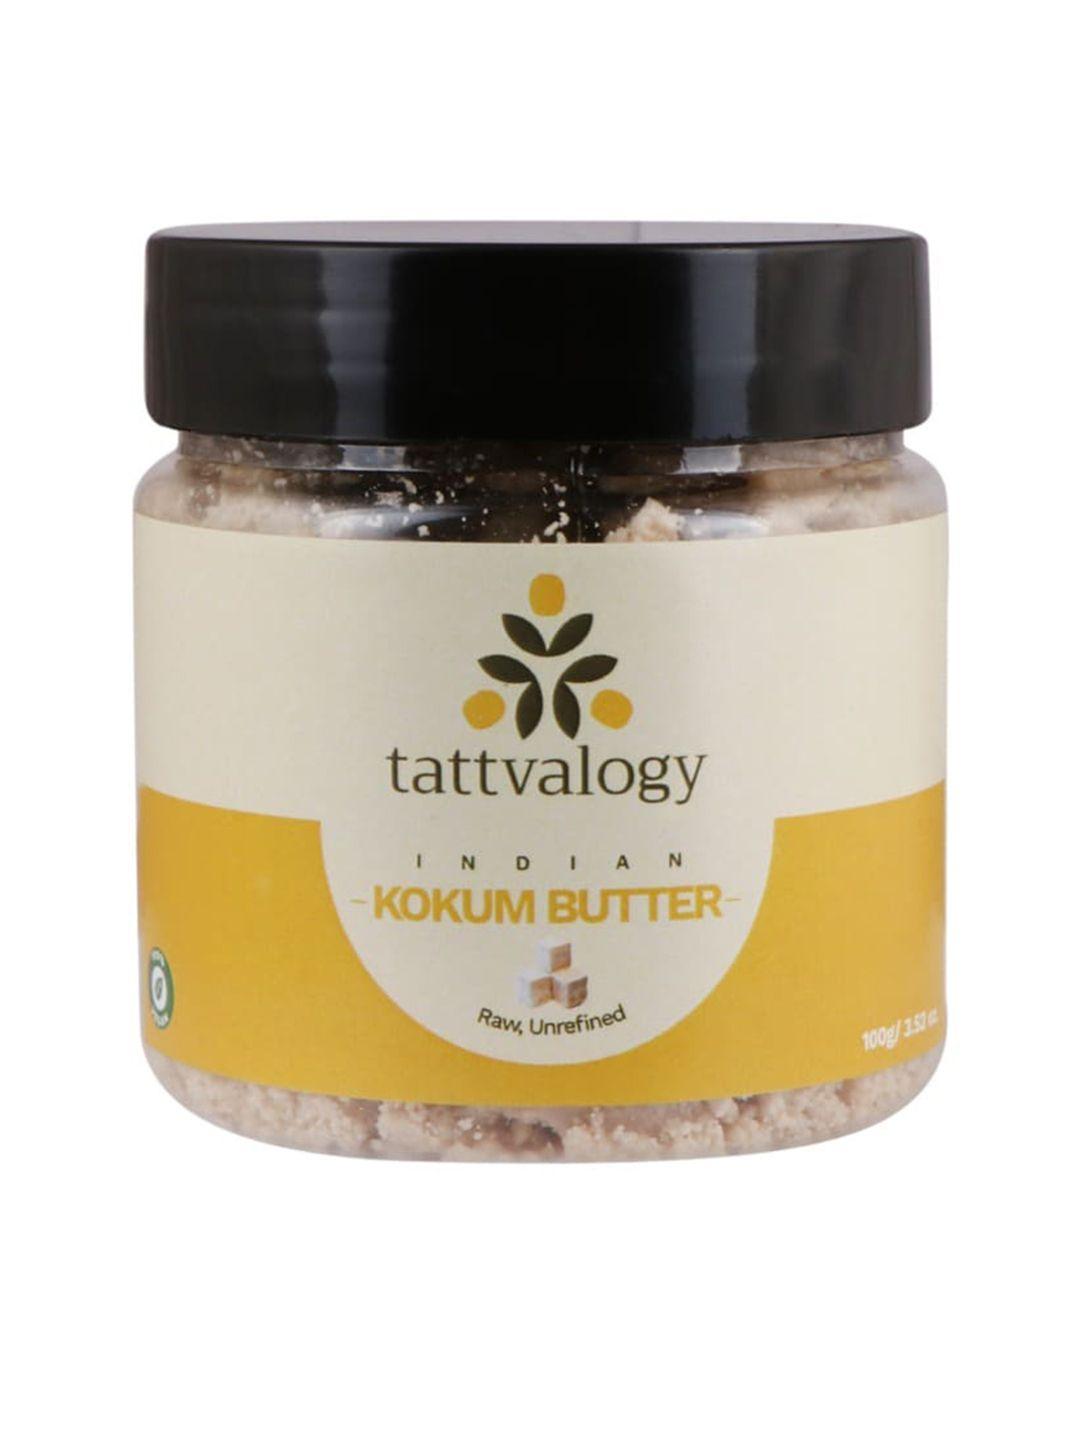 tattvalogy raw, unrefined and unprocessed kokum butter -100g